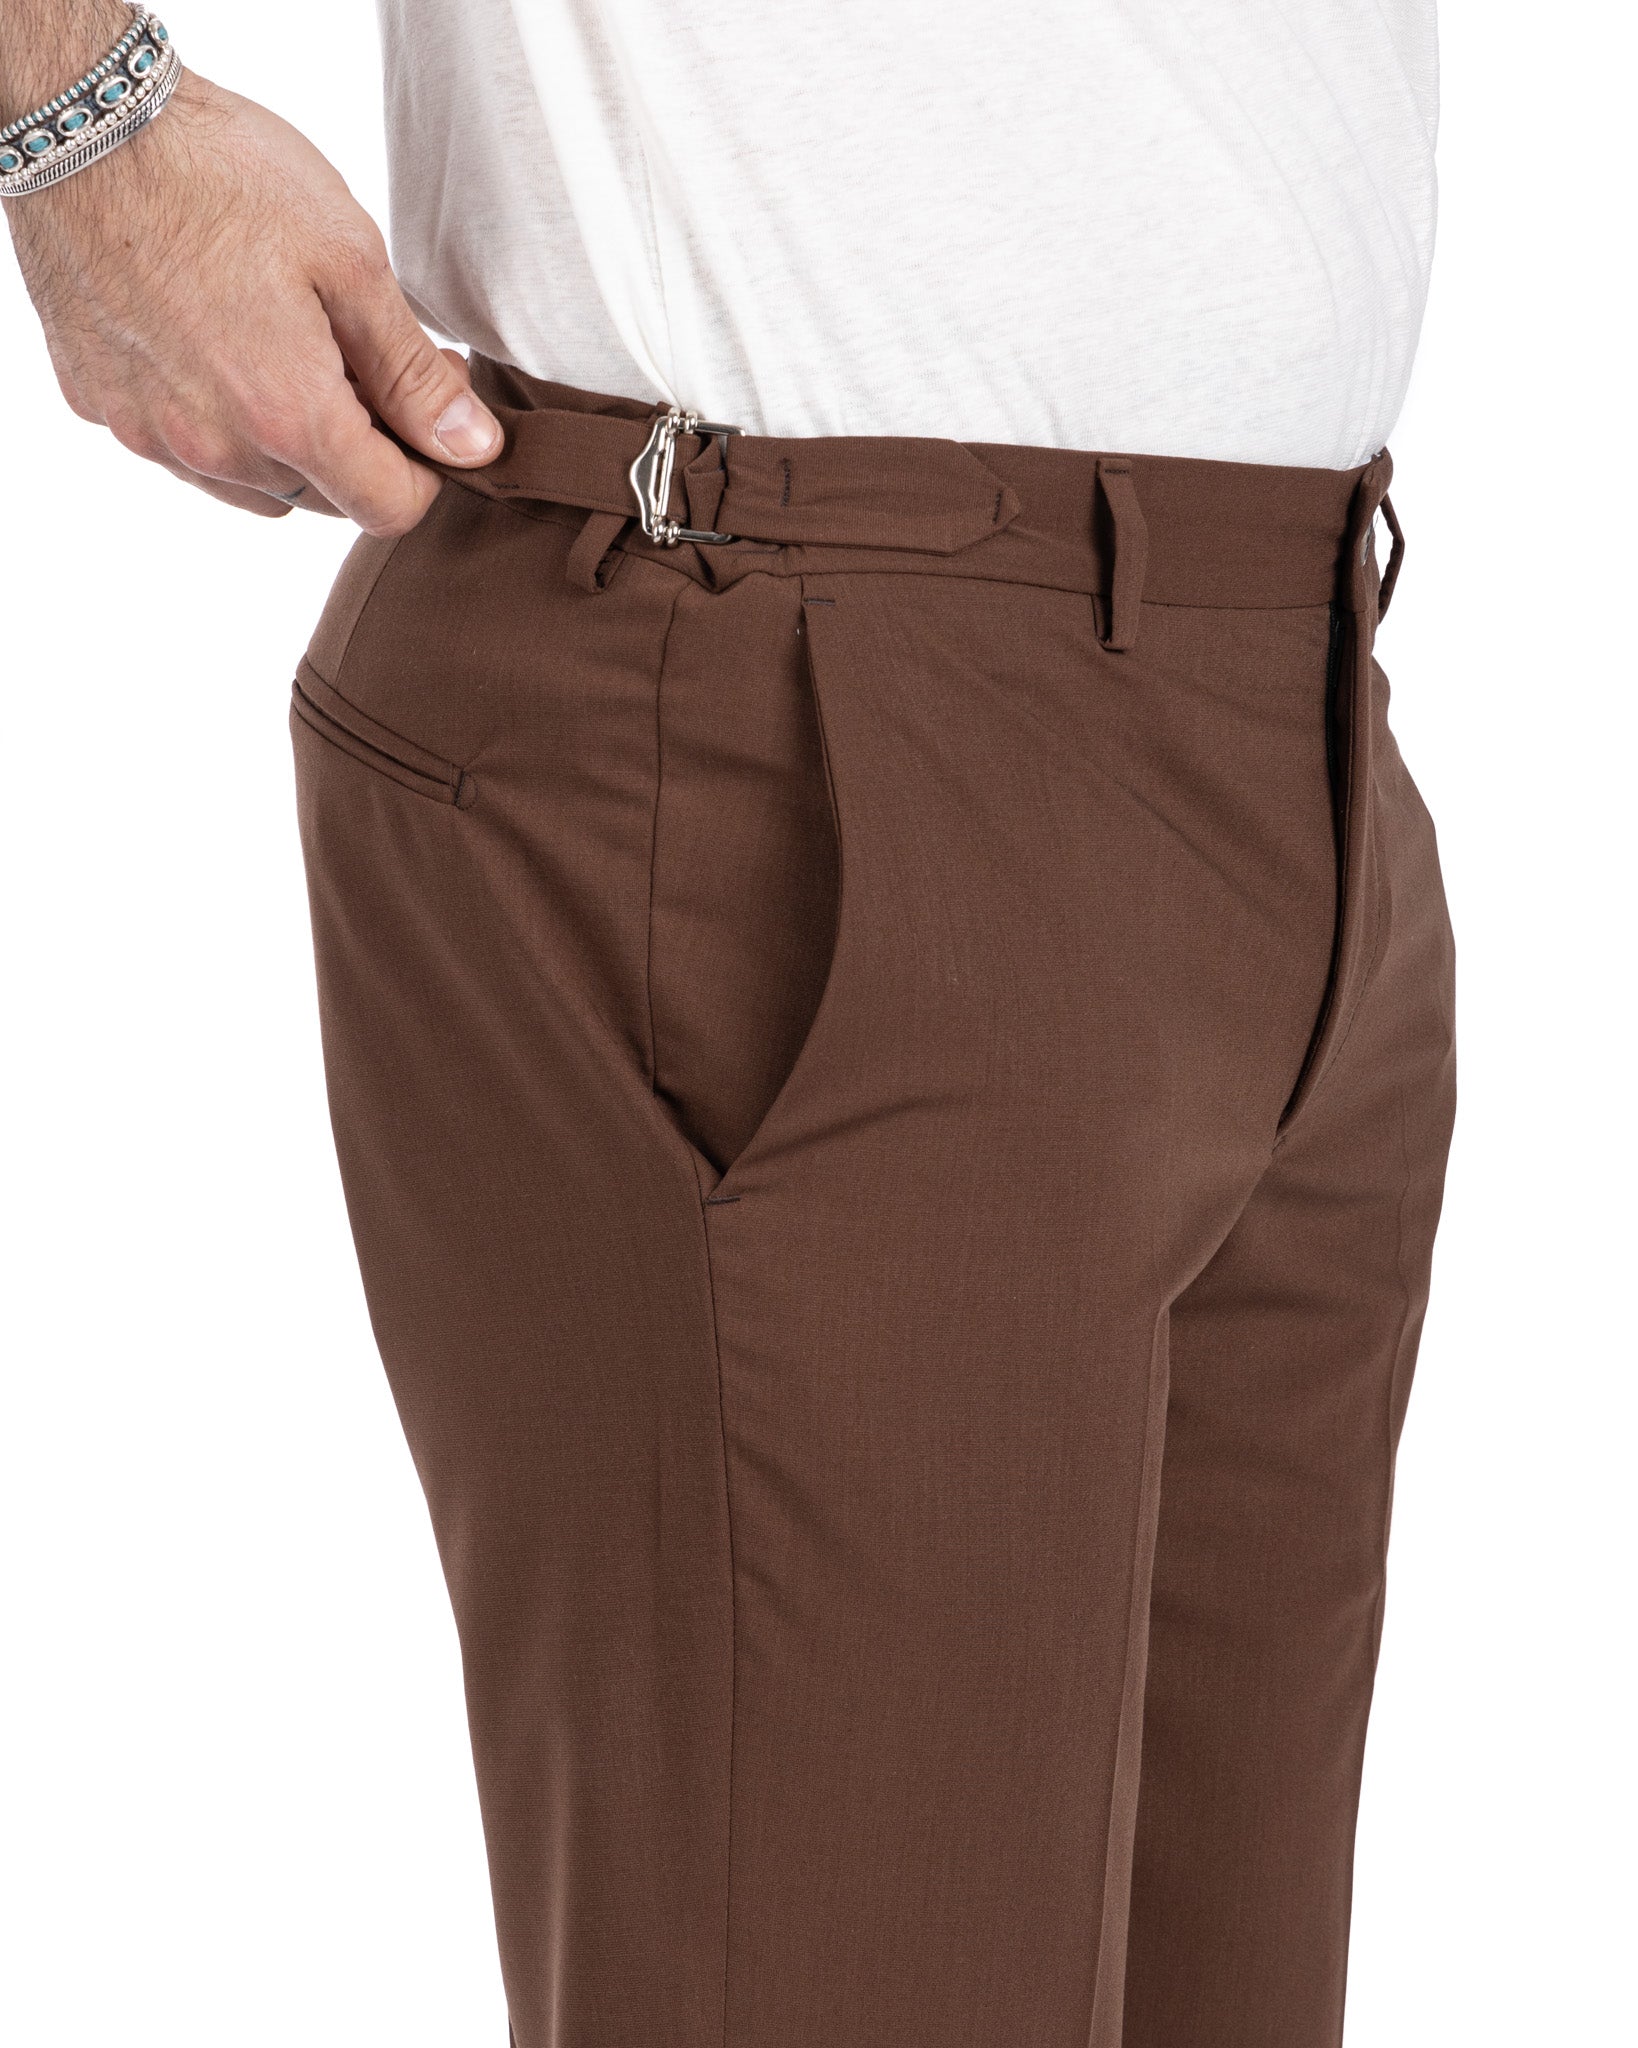 Trani - trousers with tobacco buckles